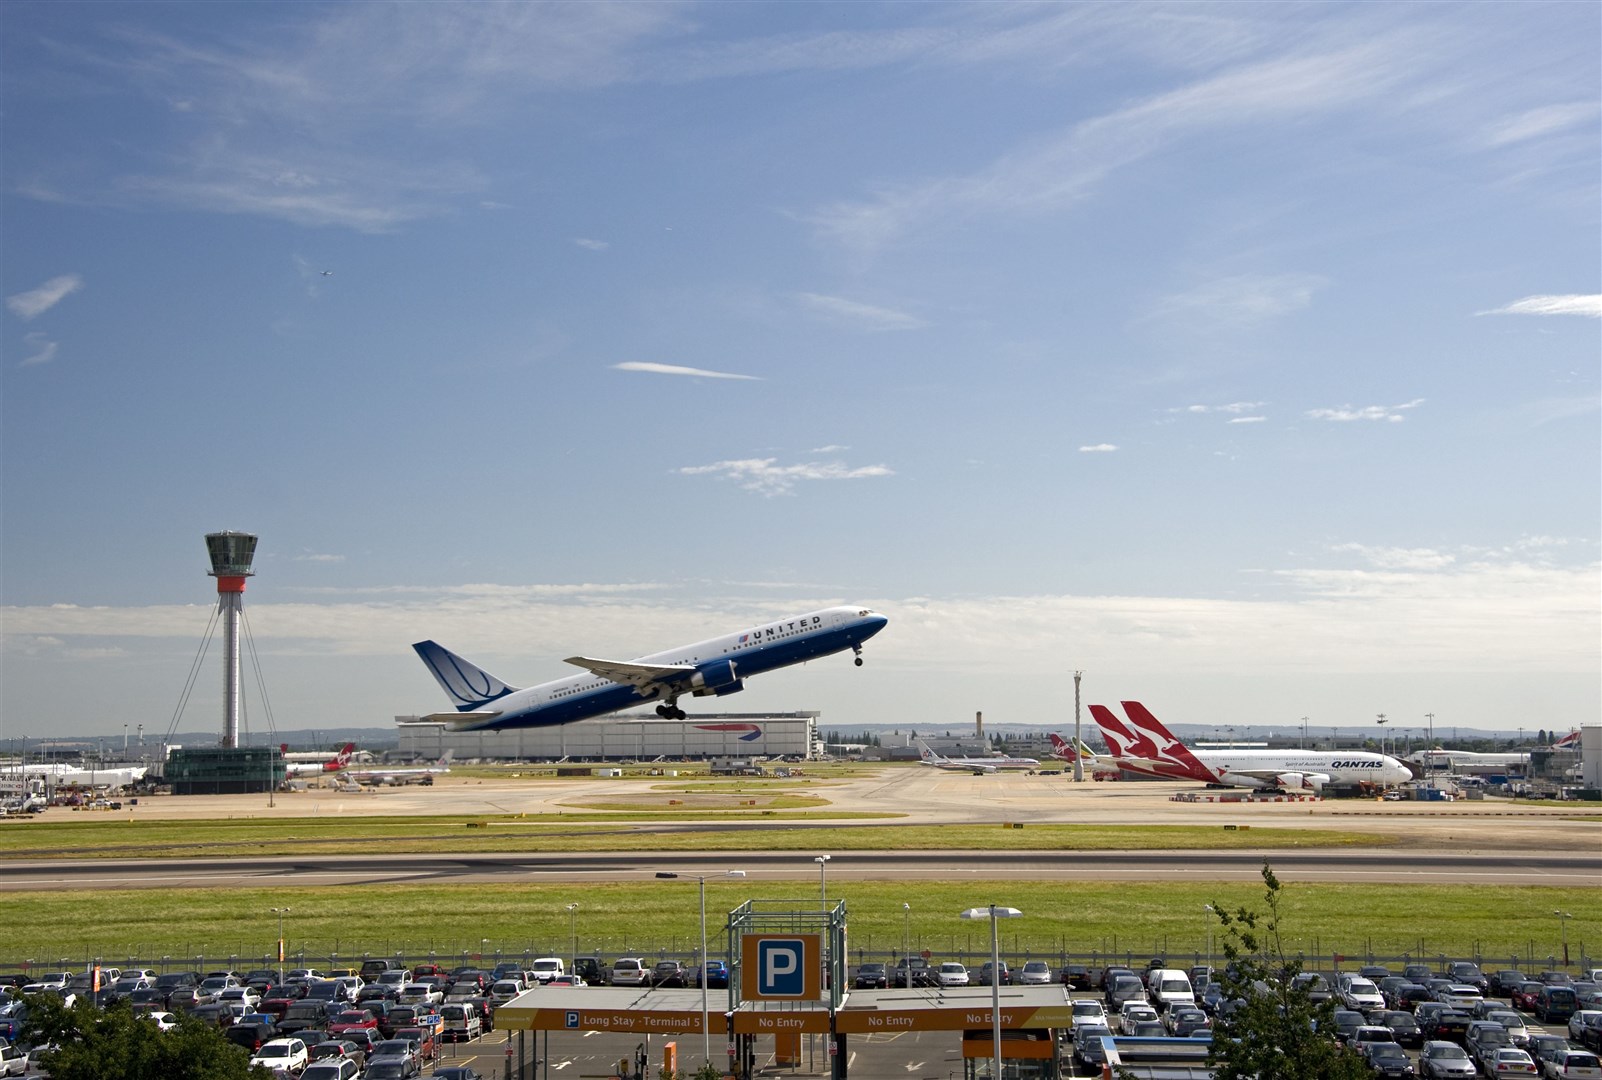 As one of the busiest airports in Europe, the Heathrow link allows the north business community a seamless connection with the wider world.